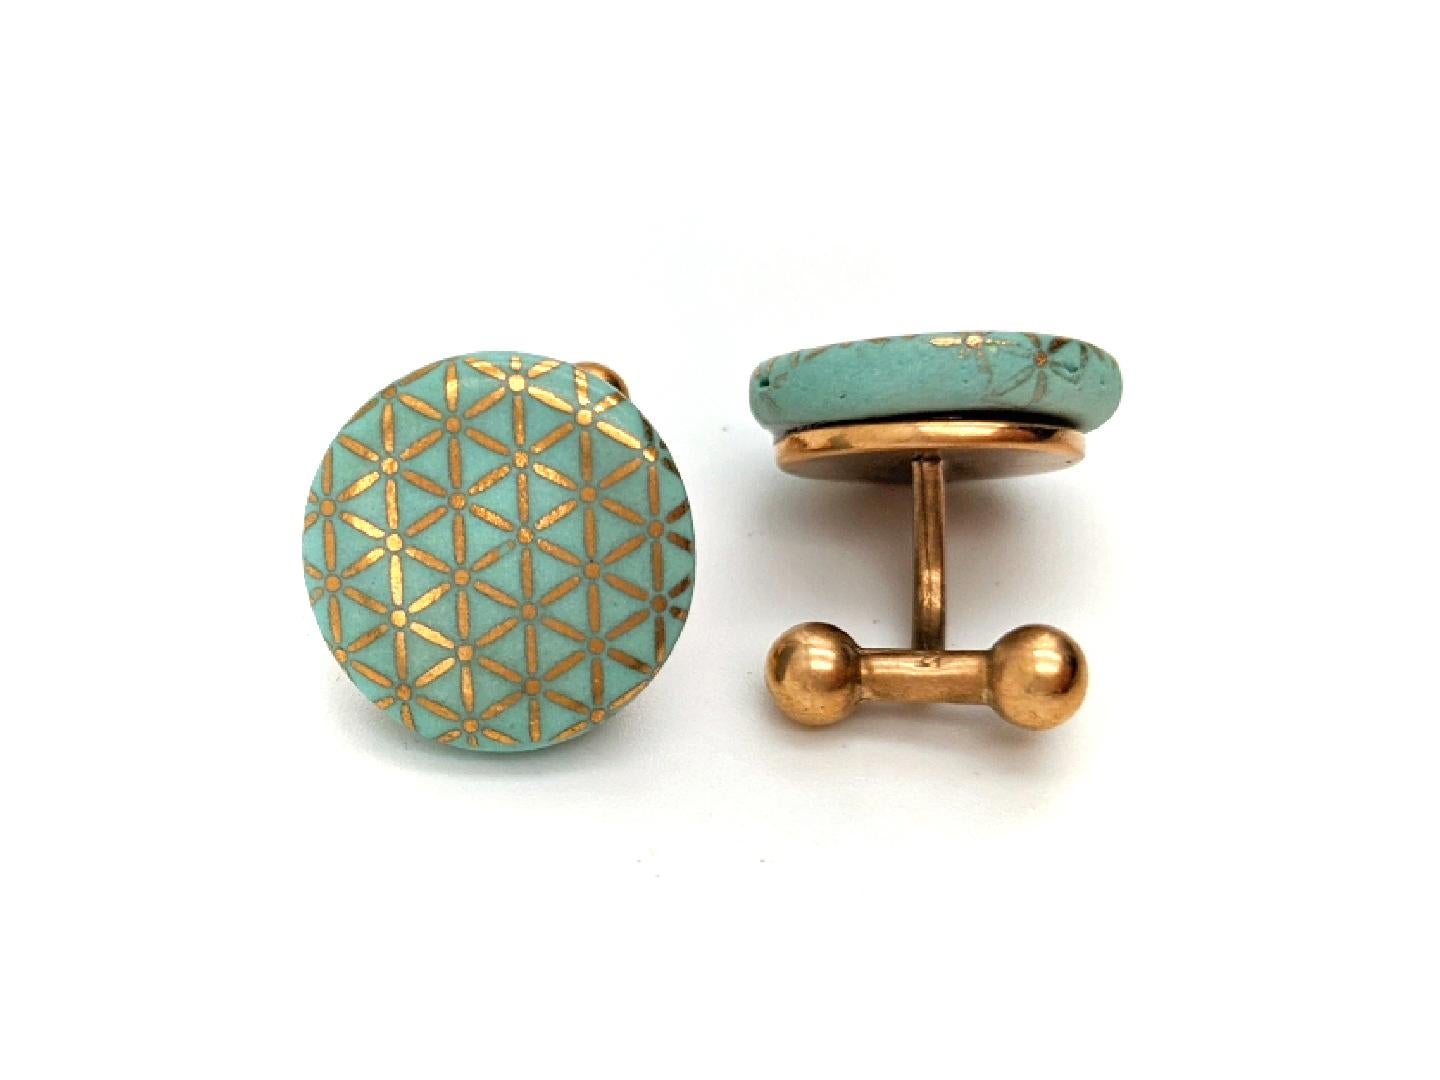 Cufflinks Mint Gold Geometric Pattern Porcelain Jewelry for Men (MADE TO ORDER) - Abstract Geometric Art by Melanie Sherman